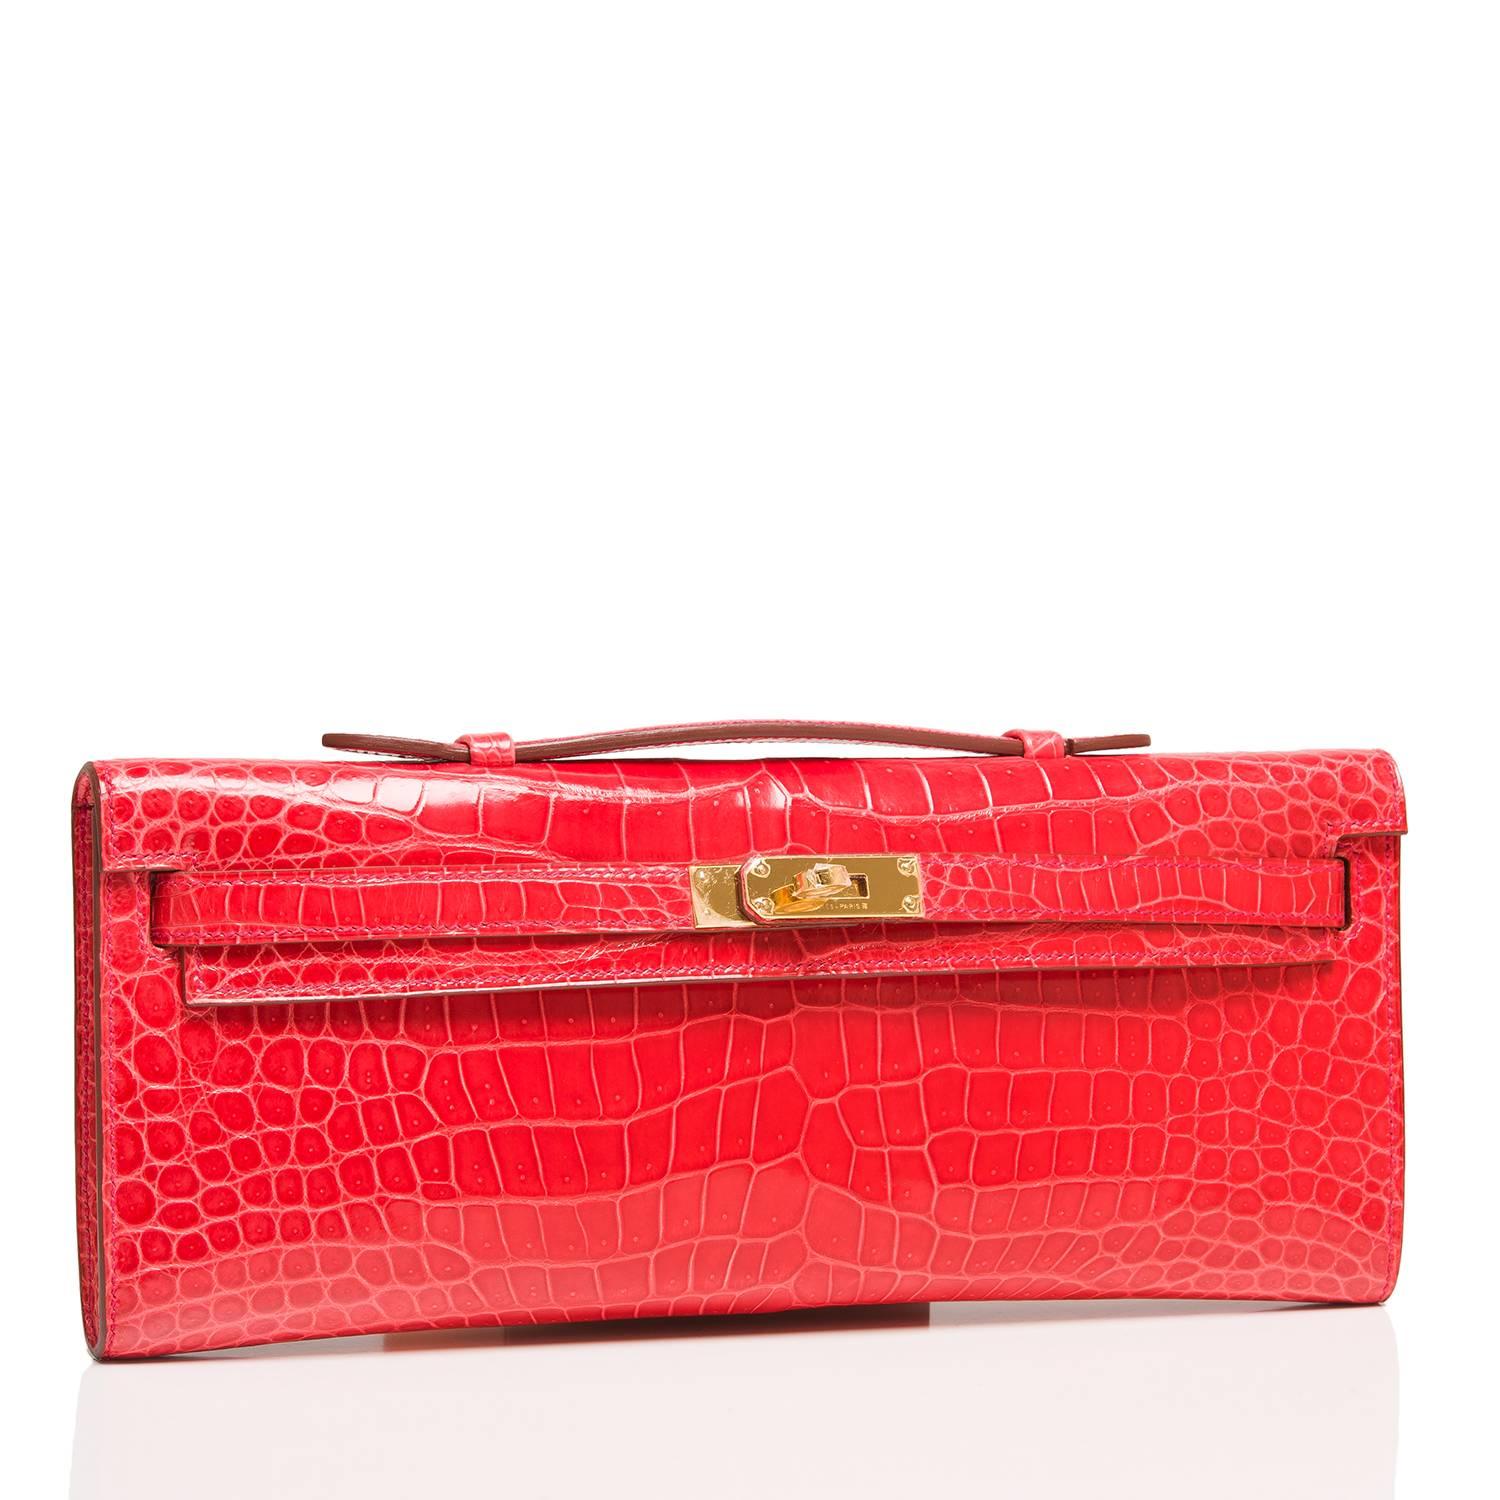 Hermes Bougainvillea (Bougainvillier) Kelly Cut in shiny Porosus Crocodile with gold hardware.

This exotic Kelly Cut has tonal stitching, front straps with toggle closure and a top flat handle.

The interior is lined in Bougainvillier chèvre